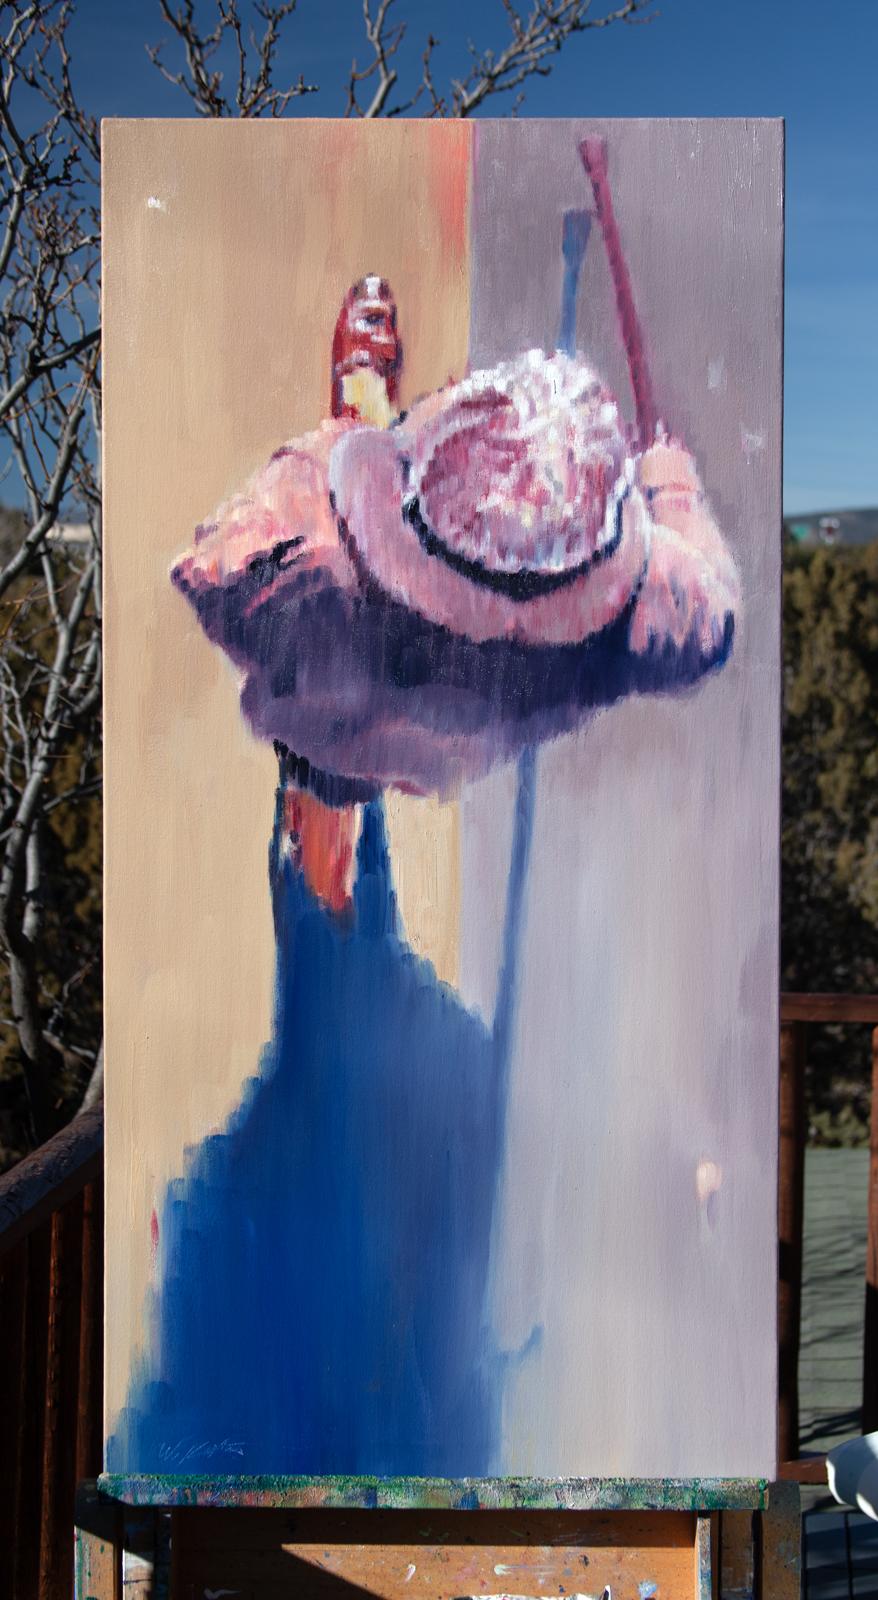 <p>Artist Comments<br />Inspired by the aerial view of pedestrians from a hotel balcony in Paris, this impressionistic painting depicts a stylishly attired woman strolling with her cane. Visible brushstrokes evoke form and light rather than realism,